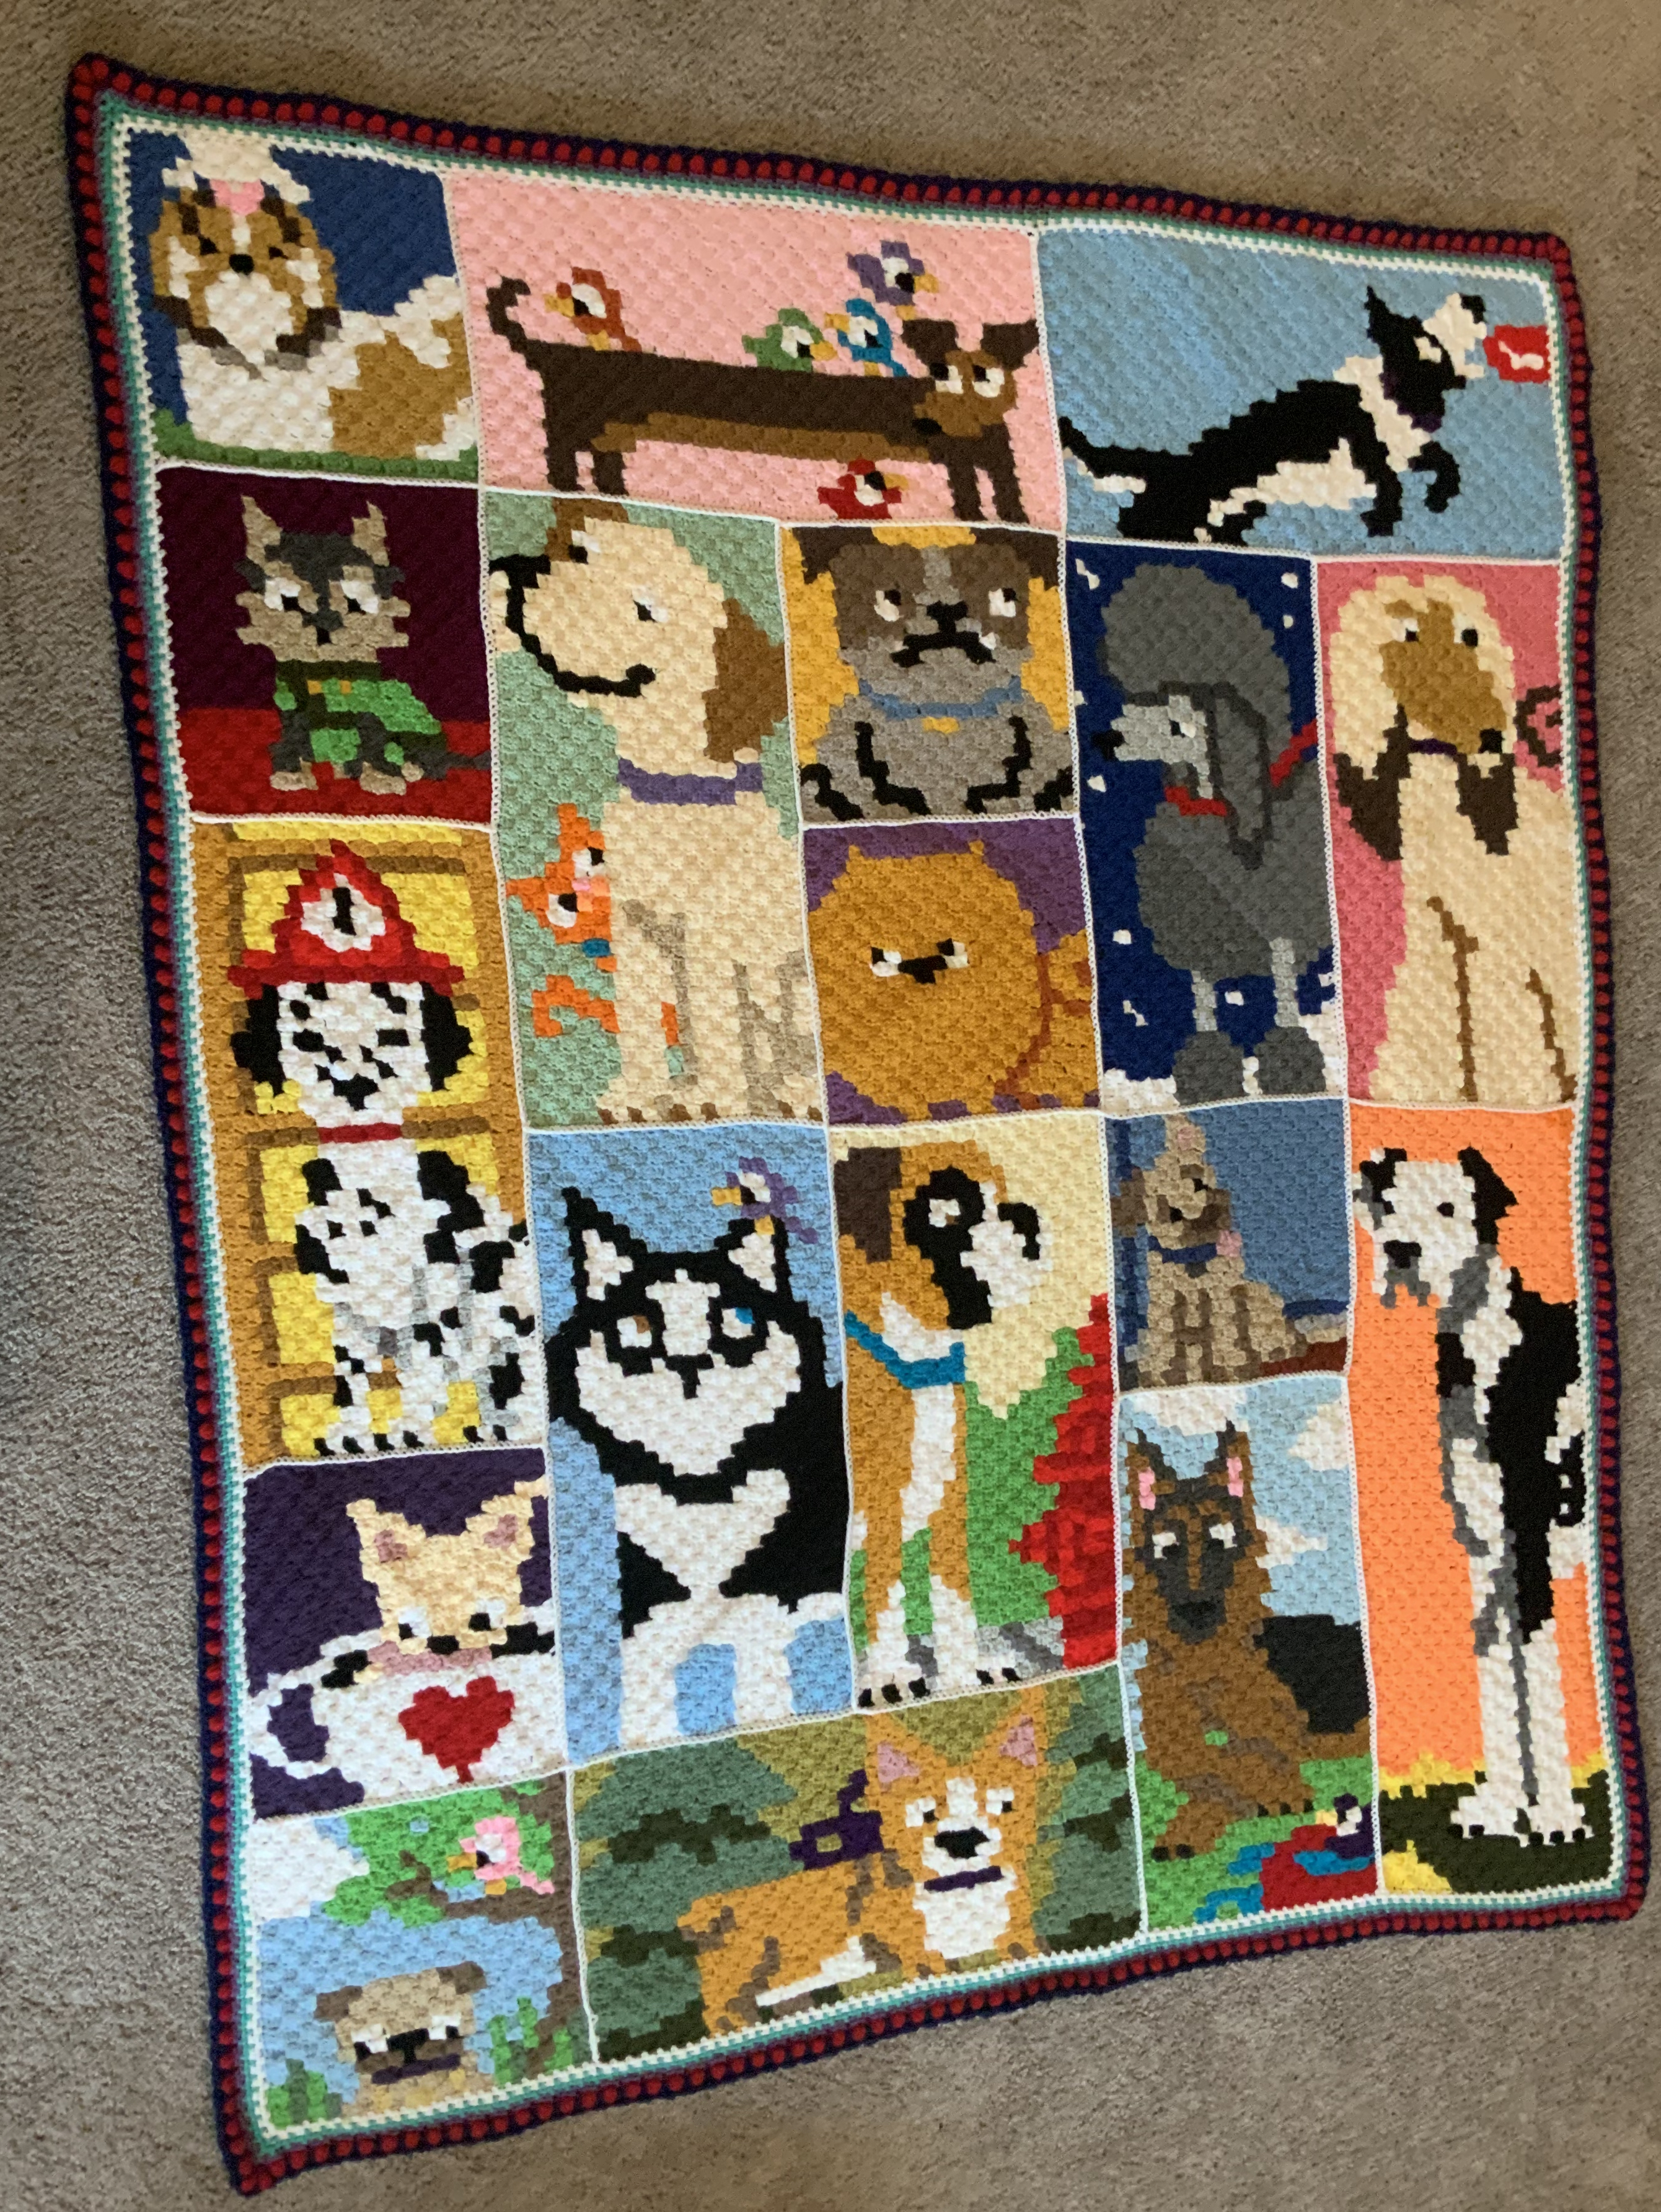 Here is the finished blanket :)